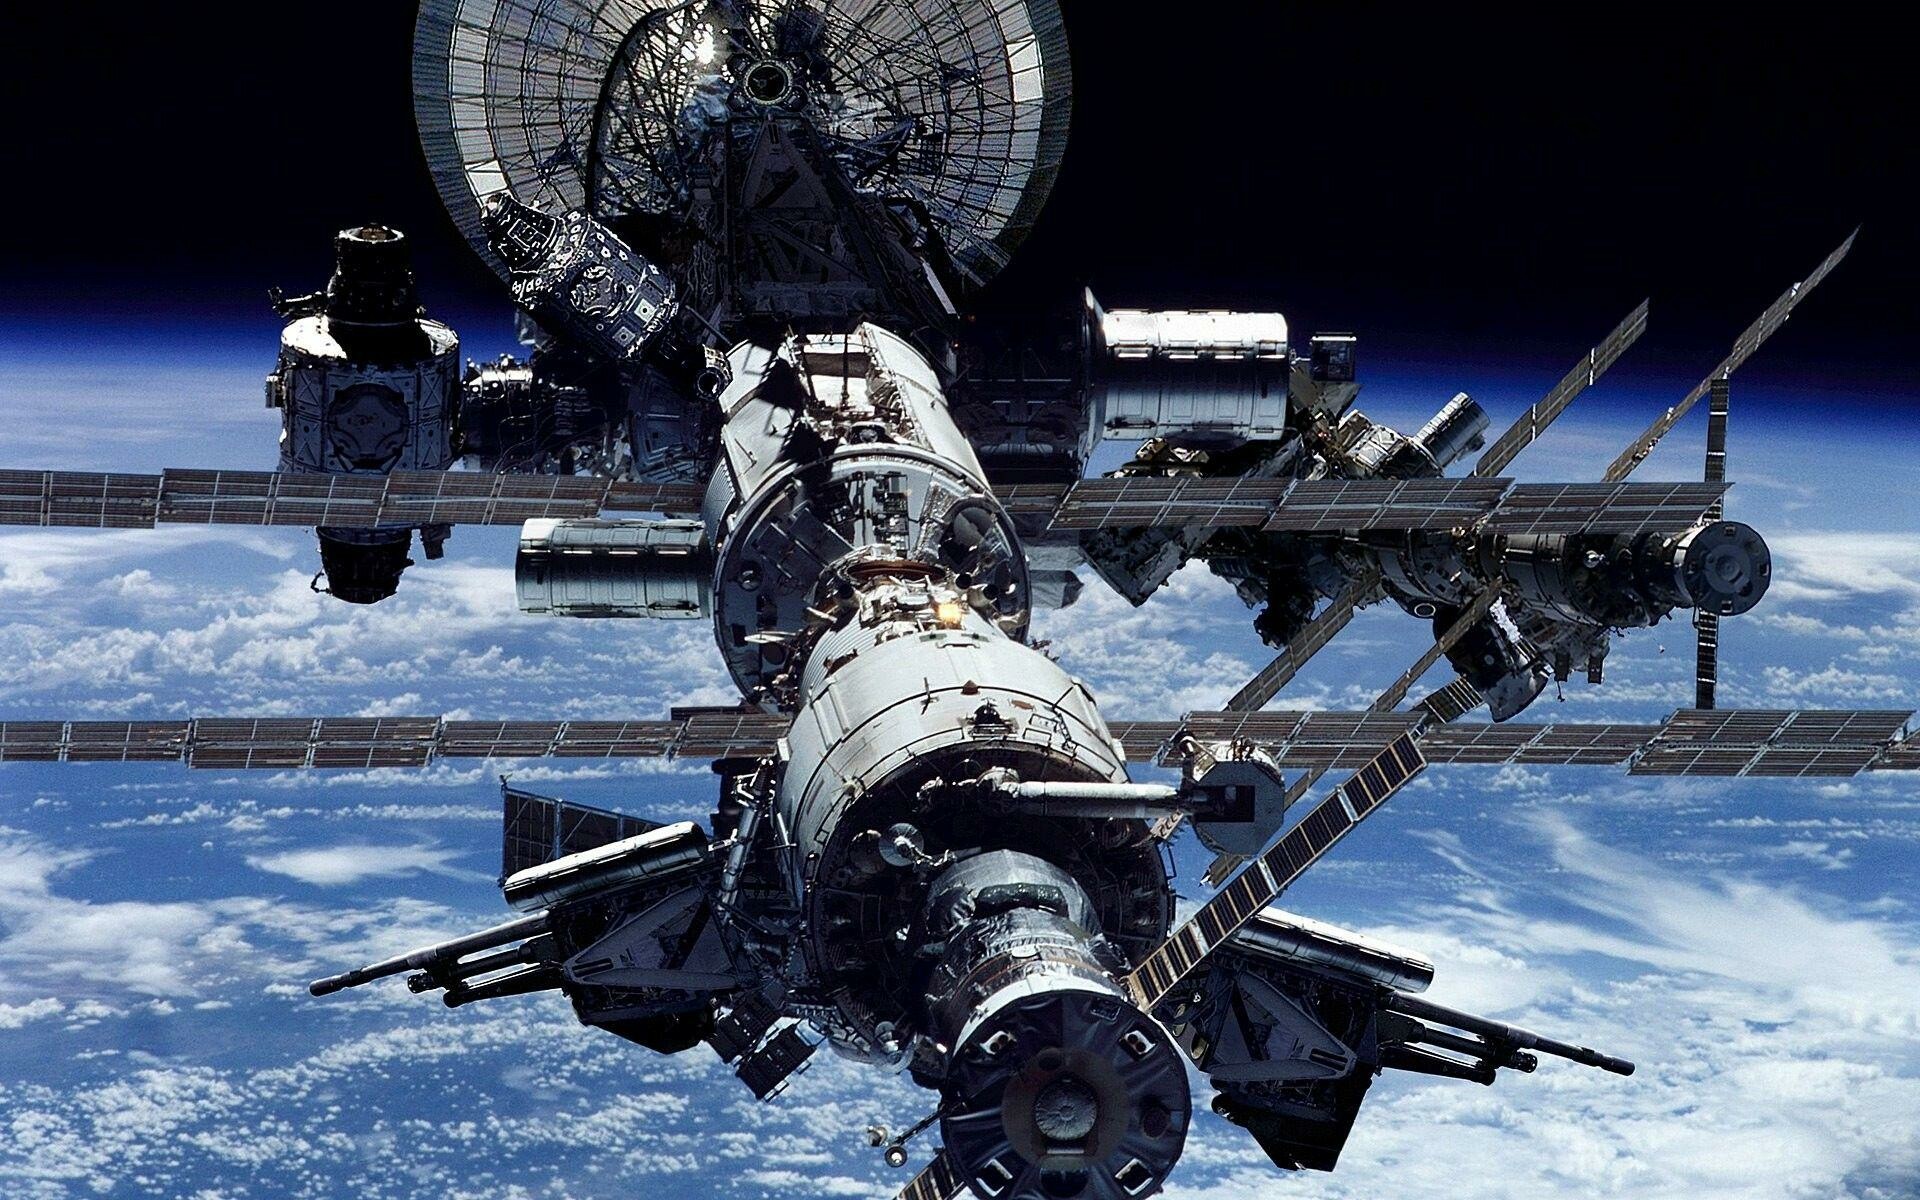 International Space Station: ISS, A joint project involving five space agencies. 1920x1200 HD Wallpaper.